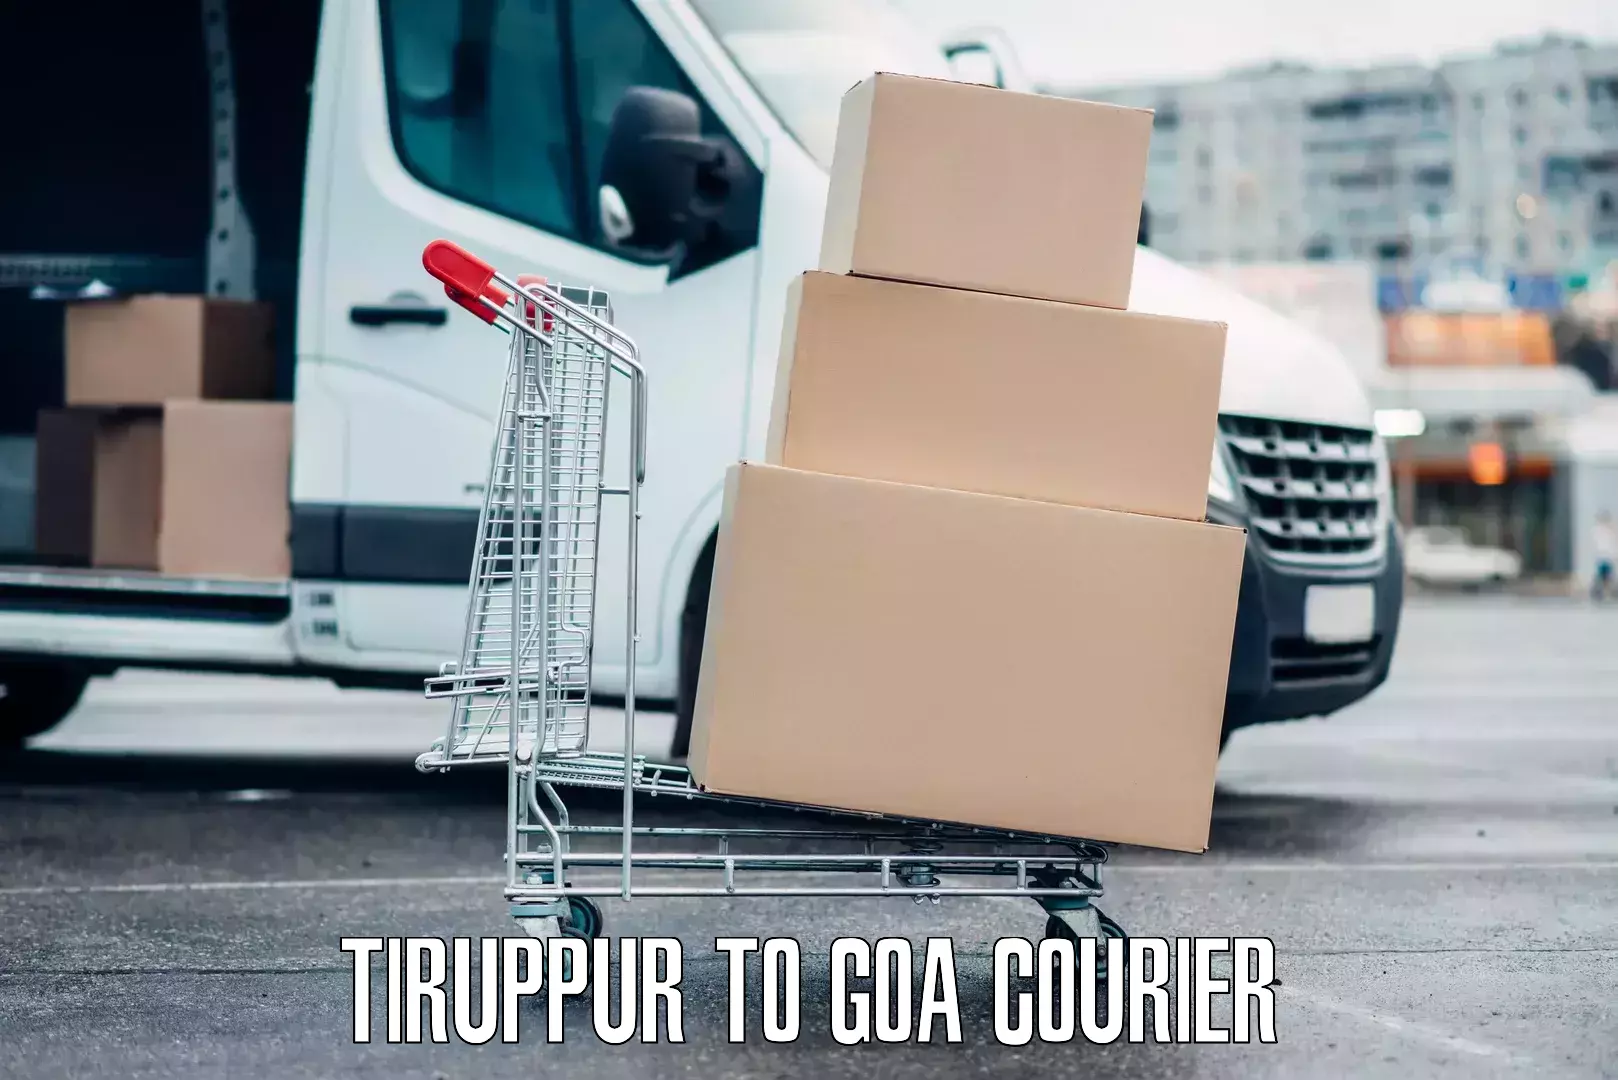 Online luggage shipping booking Tiruppur to Goa